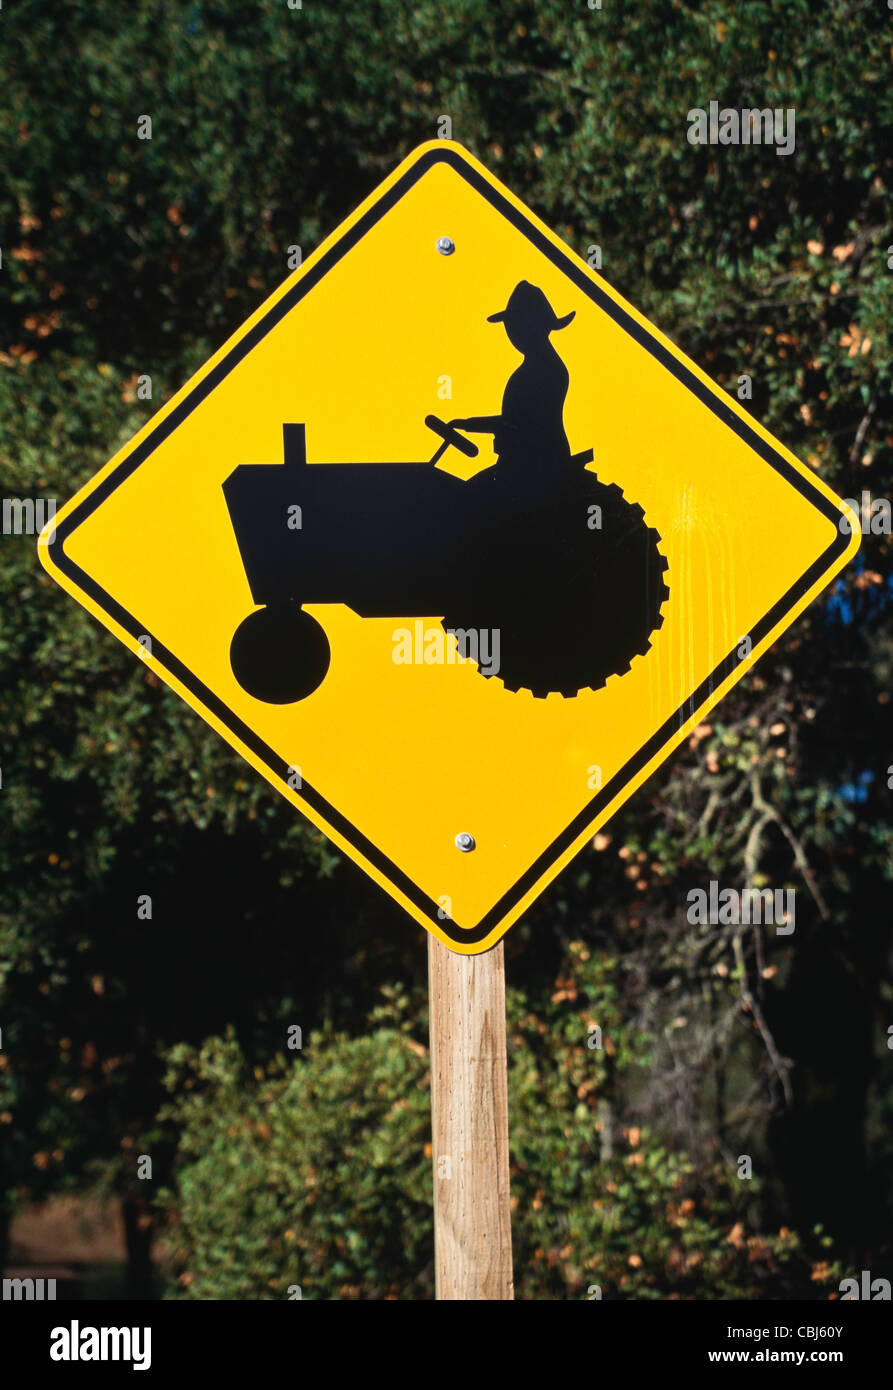 Rural Tractor on Highway Traffic Sign Stock Photo